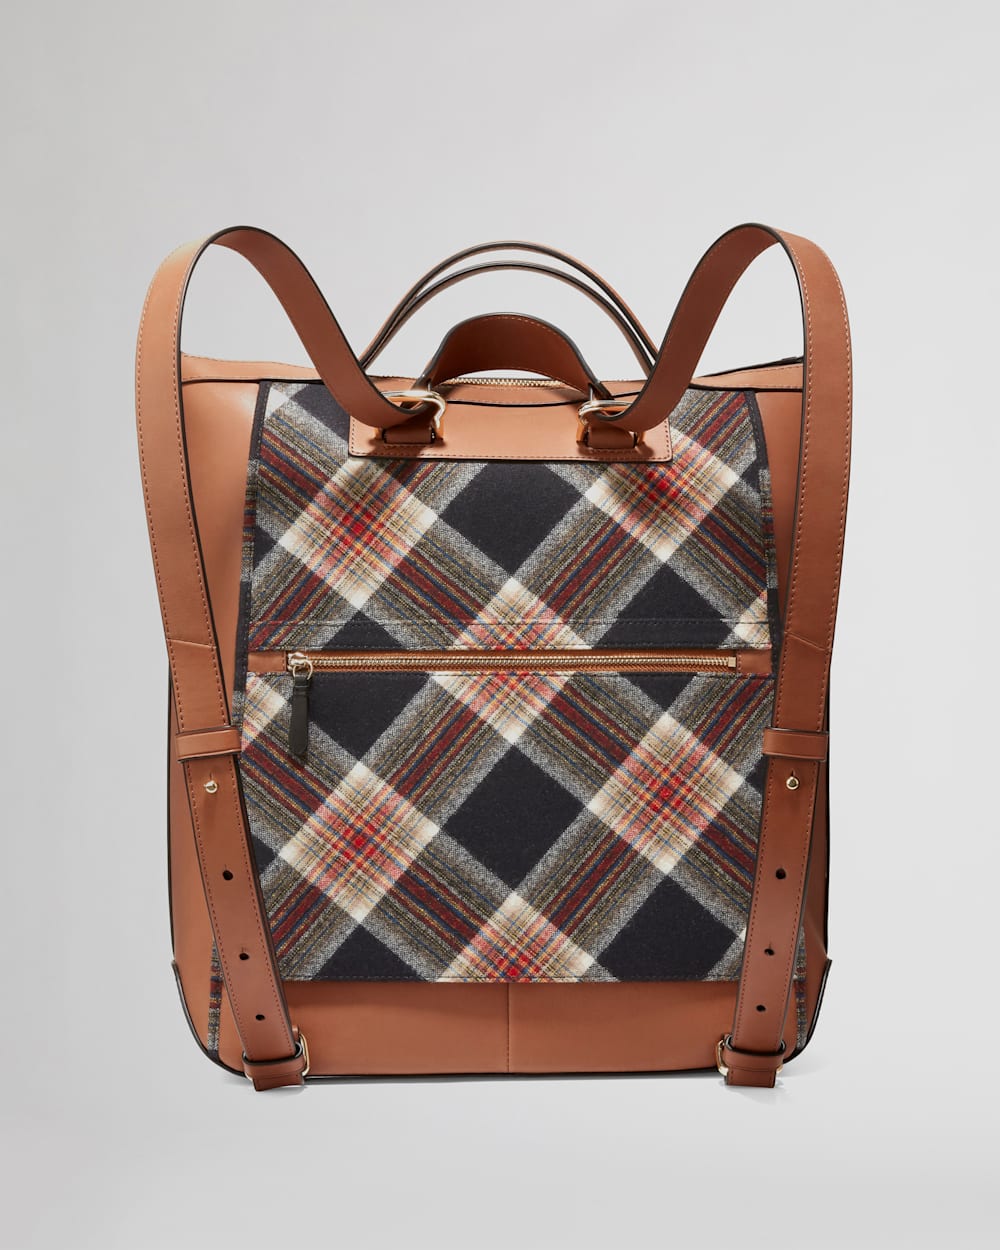 ALTERNATE VIEW OF COLE HAAN X PENDLETON GRAND AMBITION BACKPACK IN ACADIA PLAID image number 3